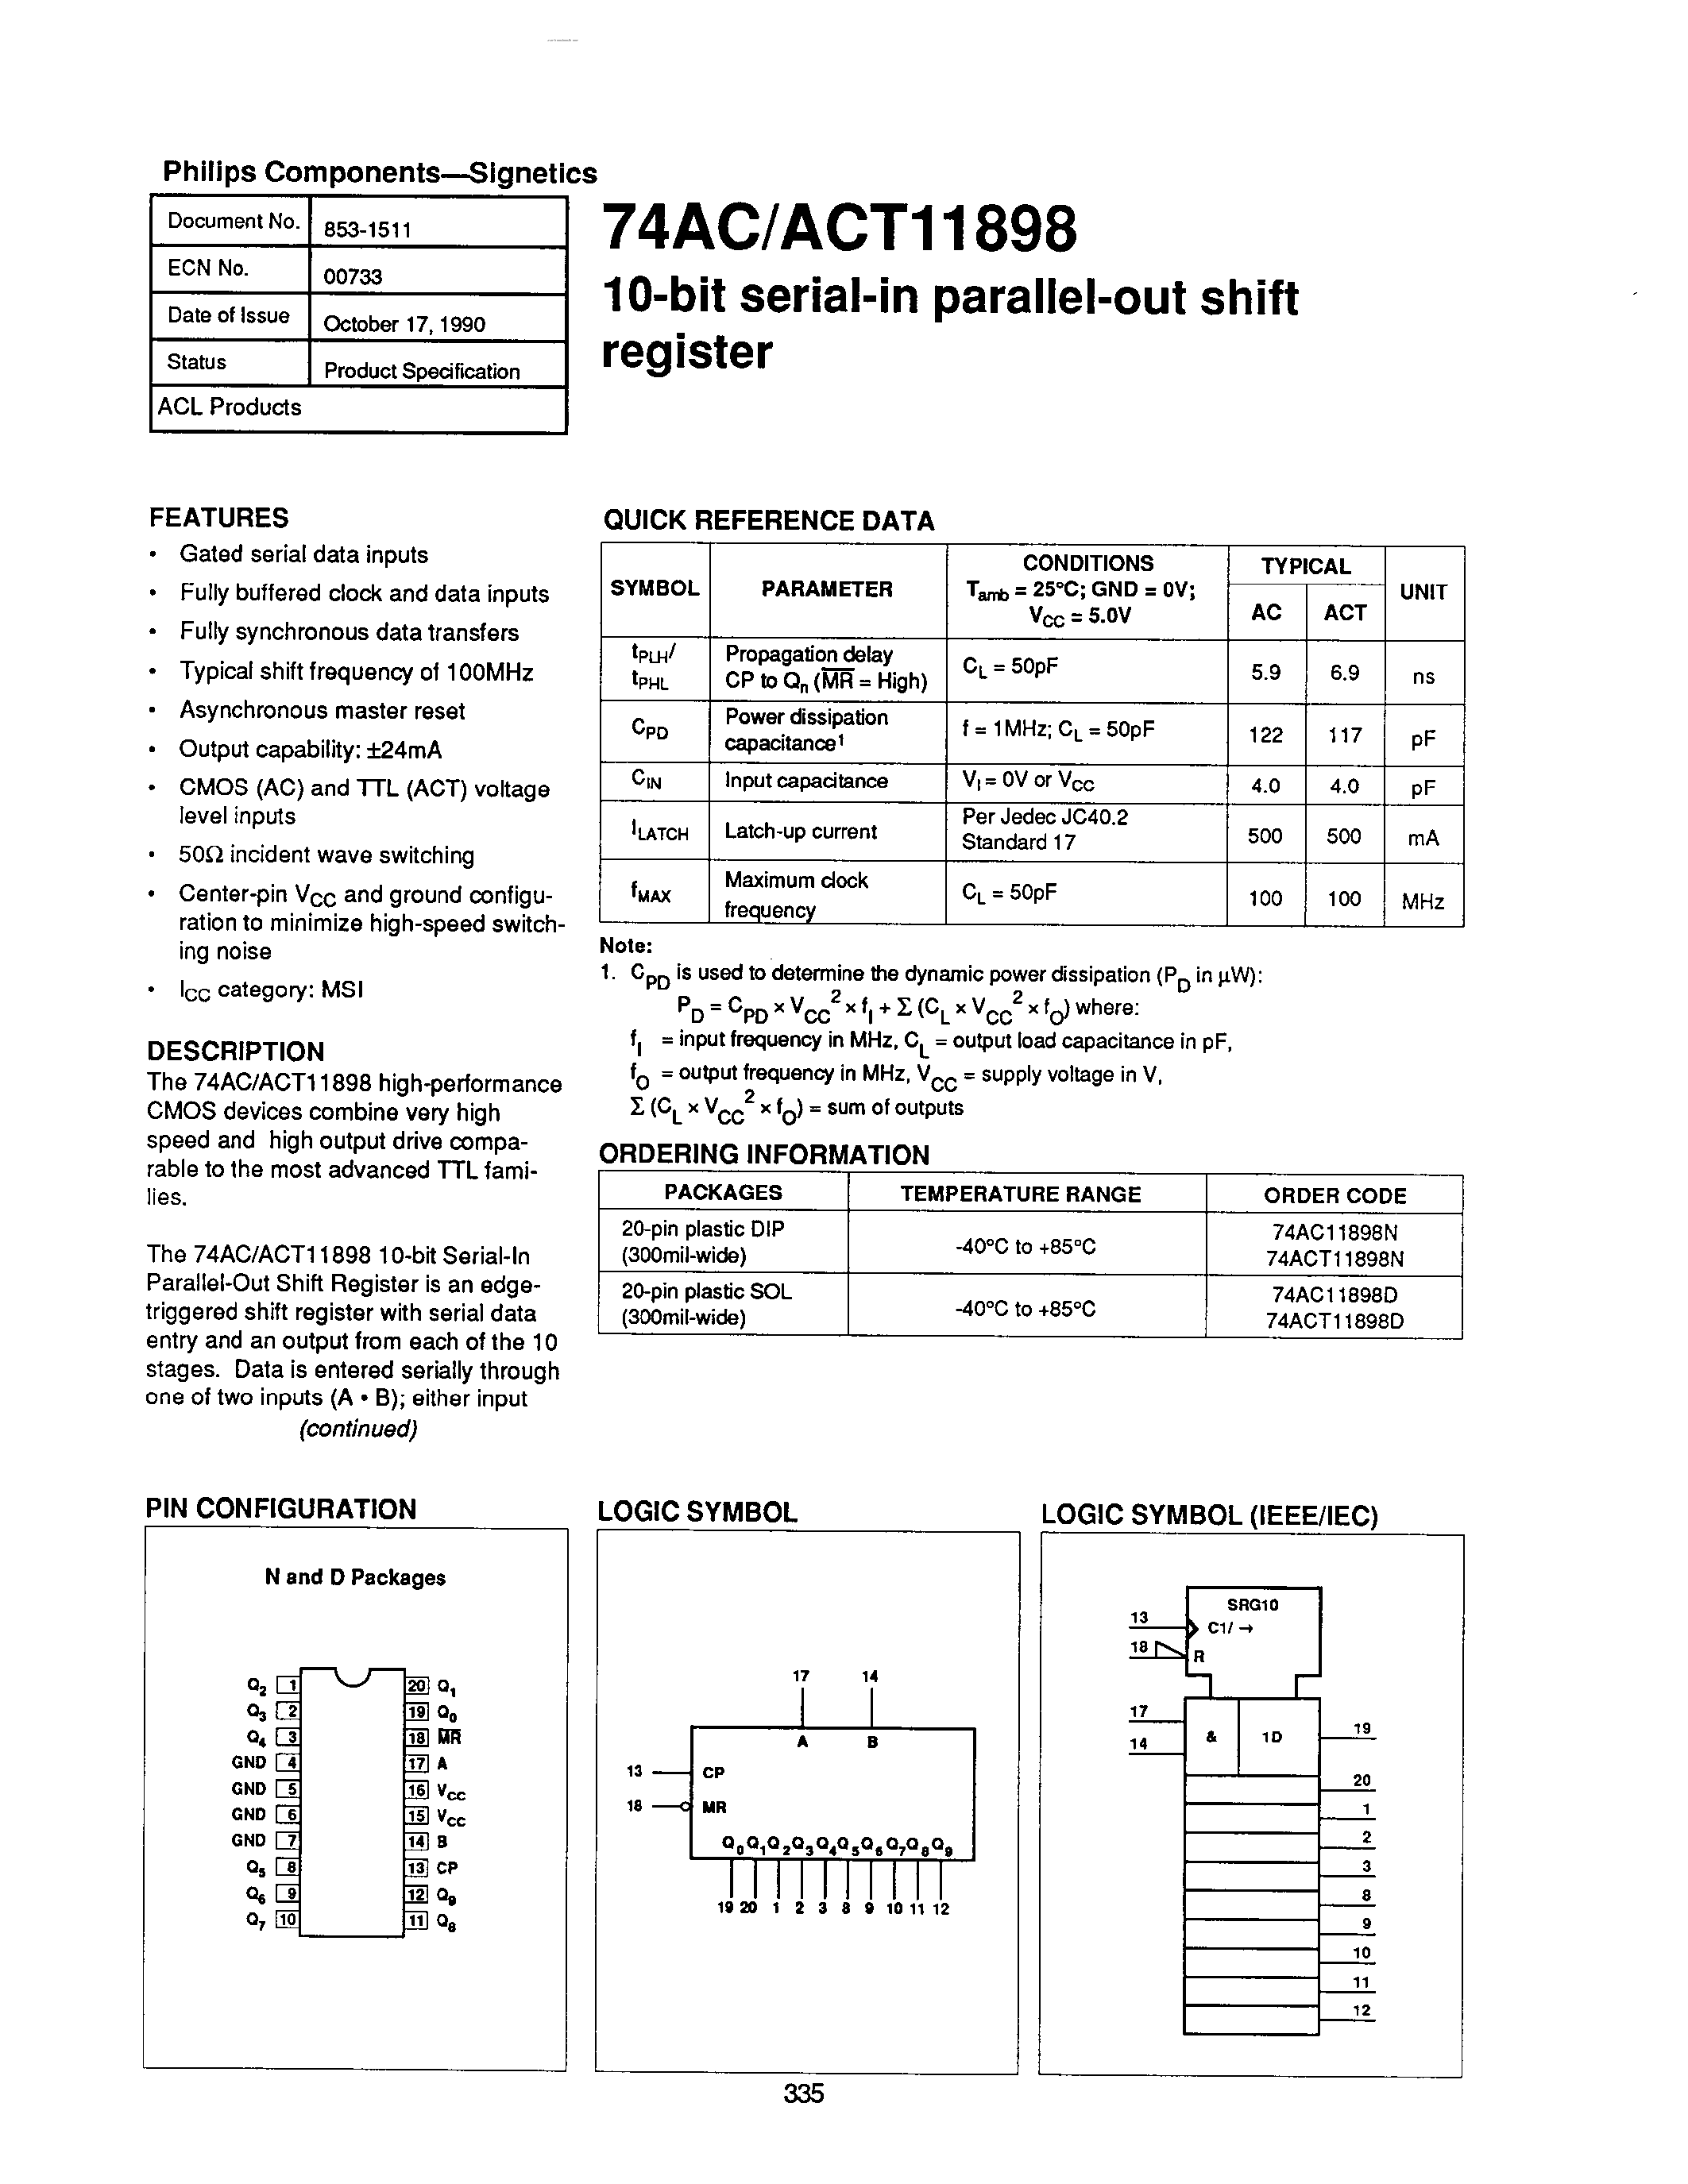 Datasheet 74AC11898 - 10-bit serial-in parallel-out shift register page 1